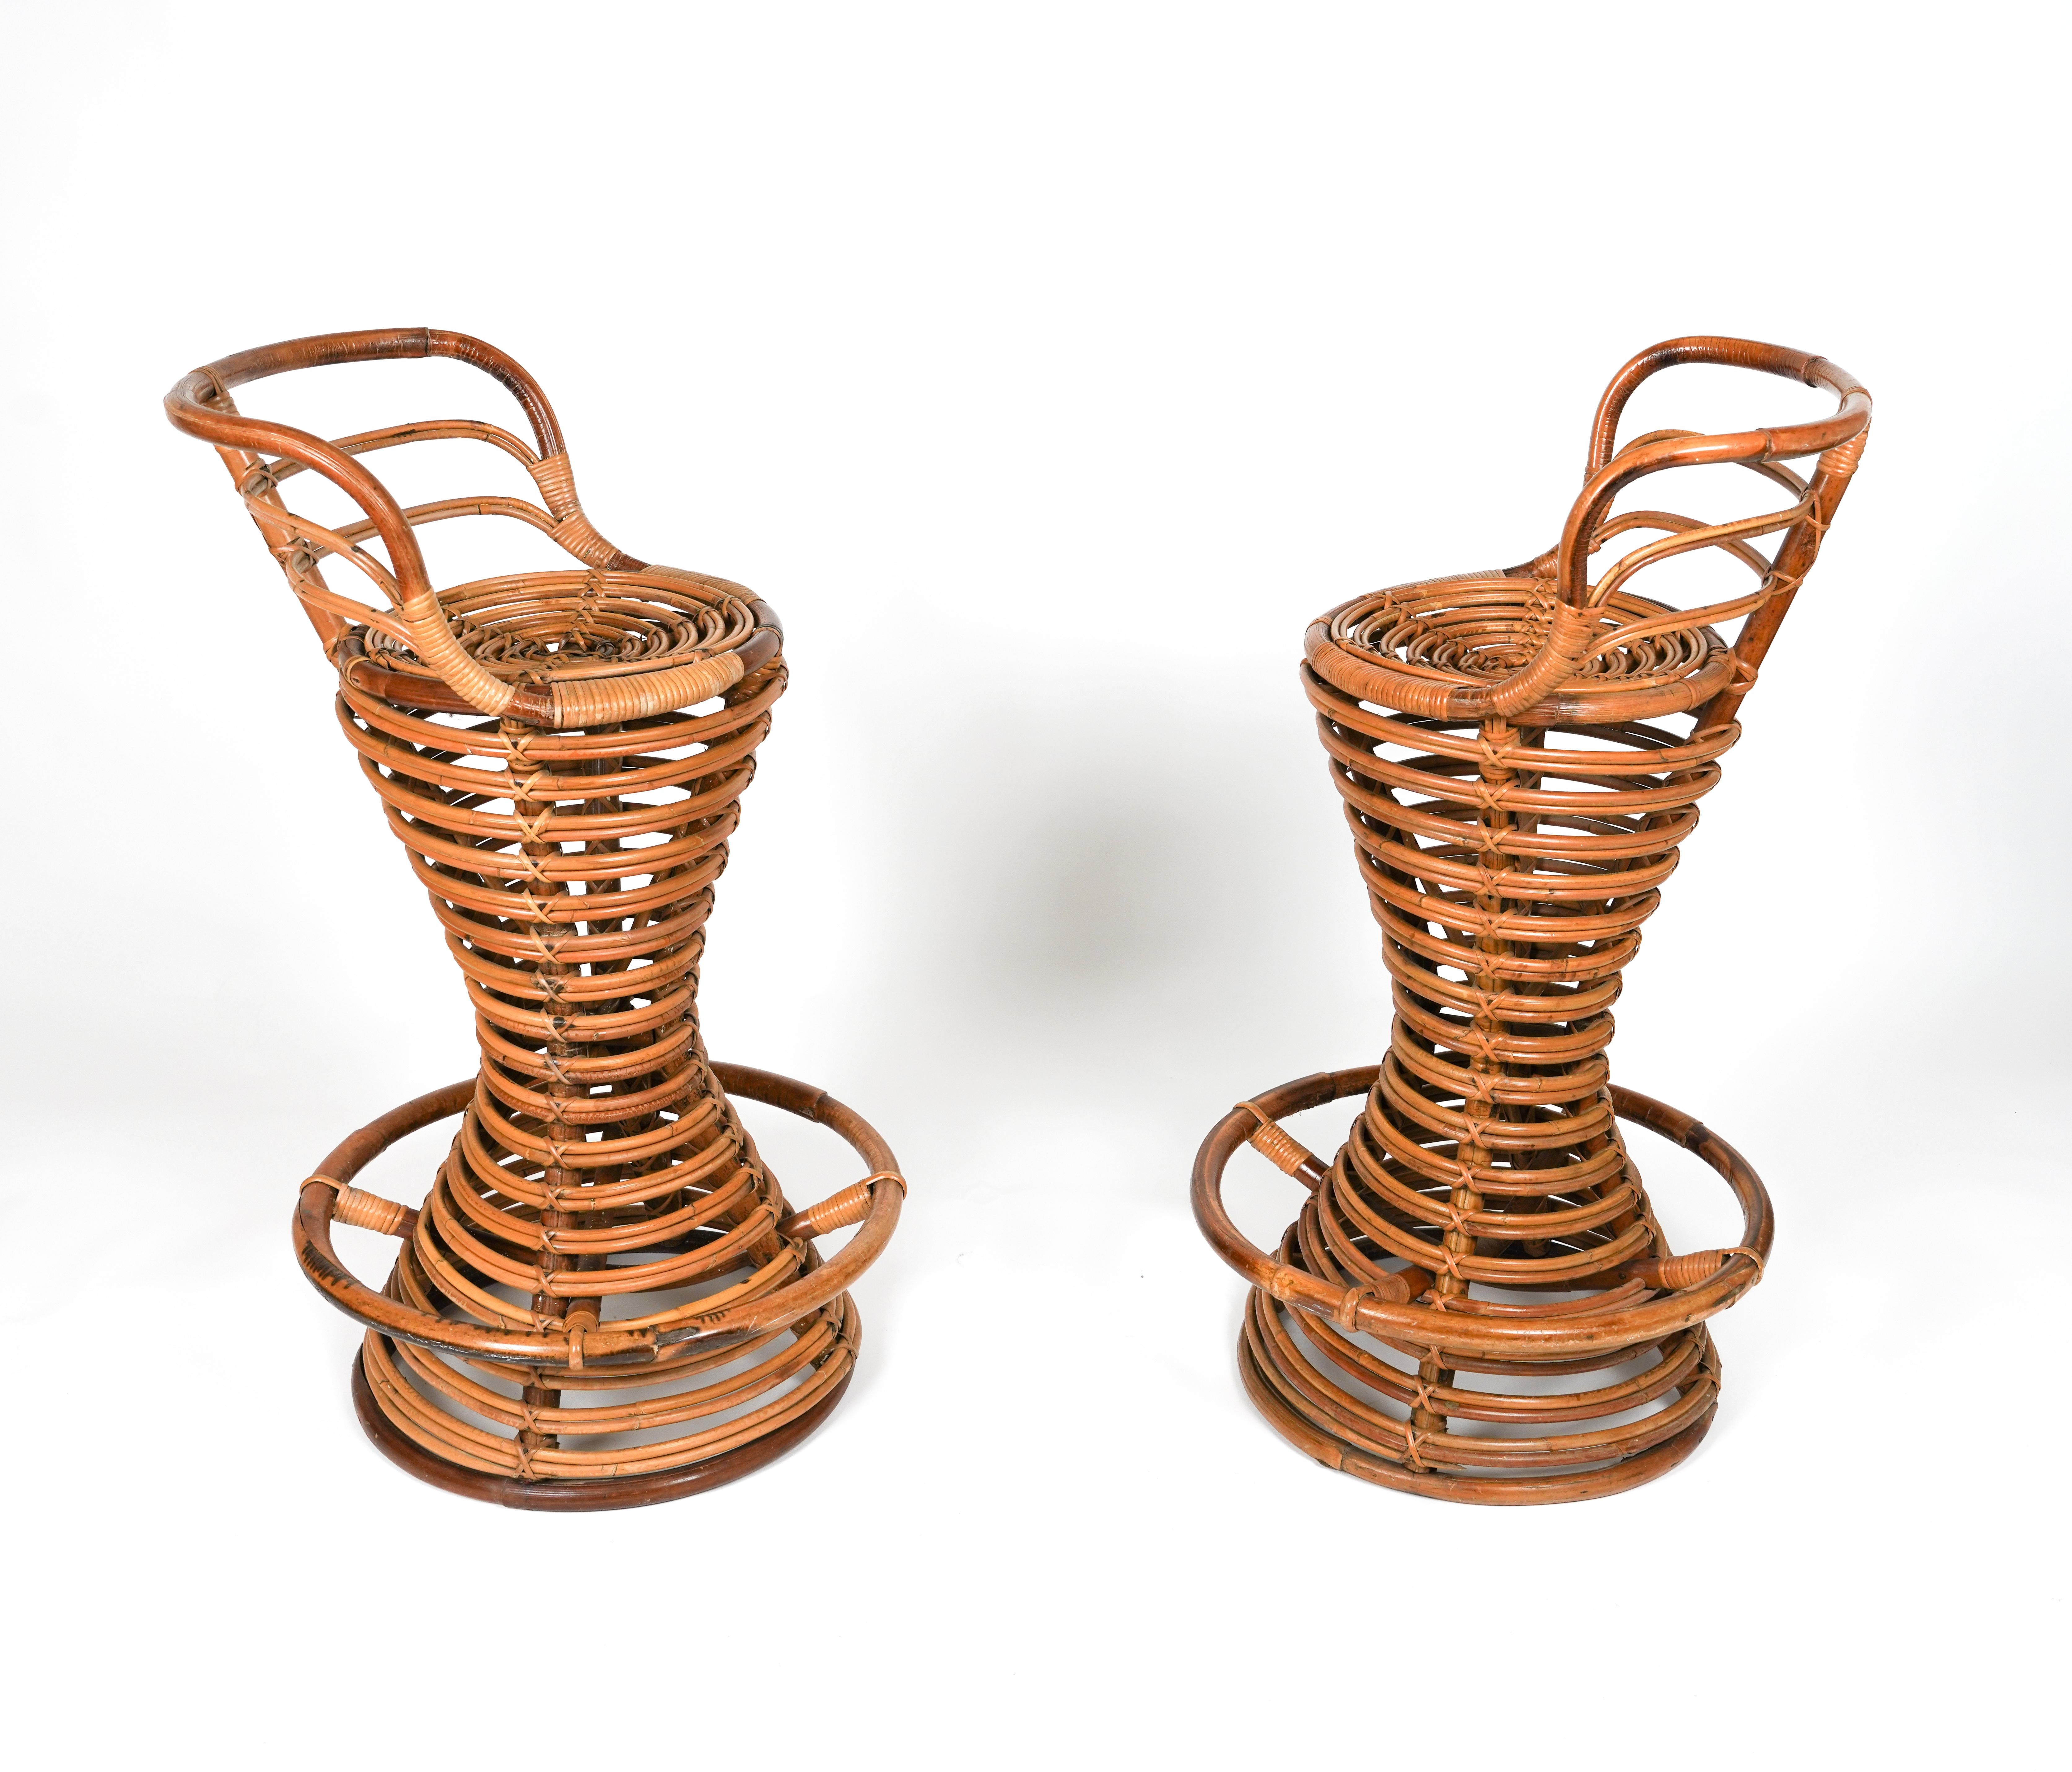 Midcentury Rattan and Bamboo Pair of Bar Stools Tito Agnoli Style, Italy 1960s For Sale 1